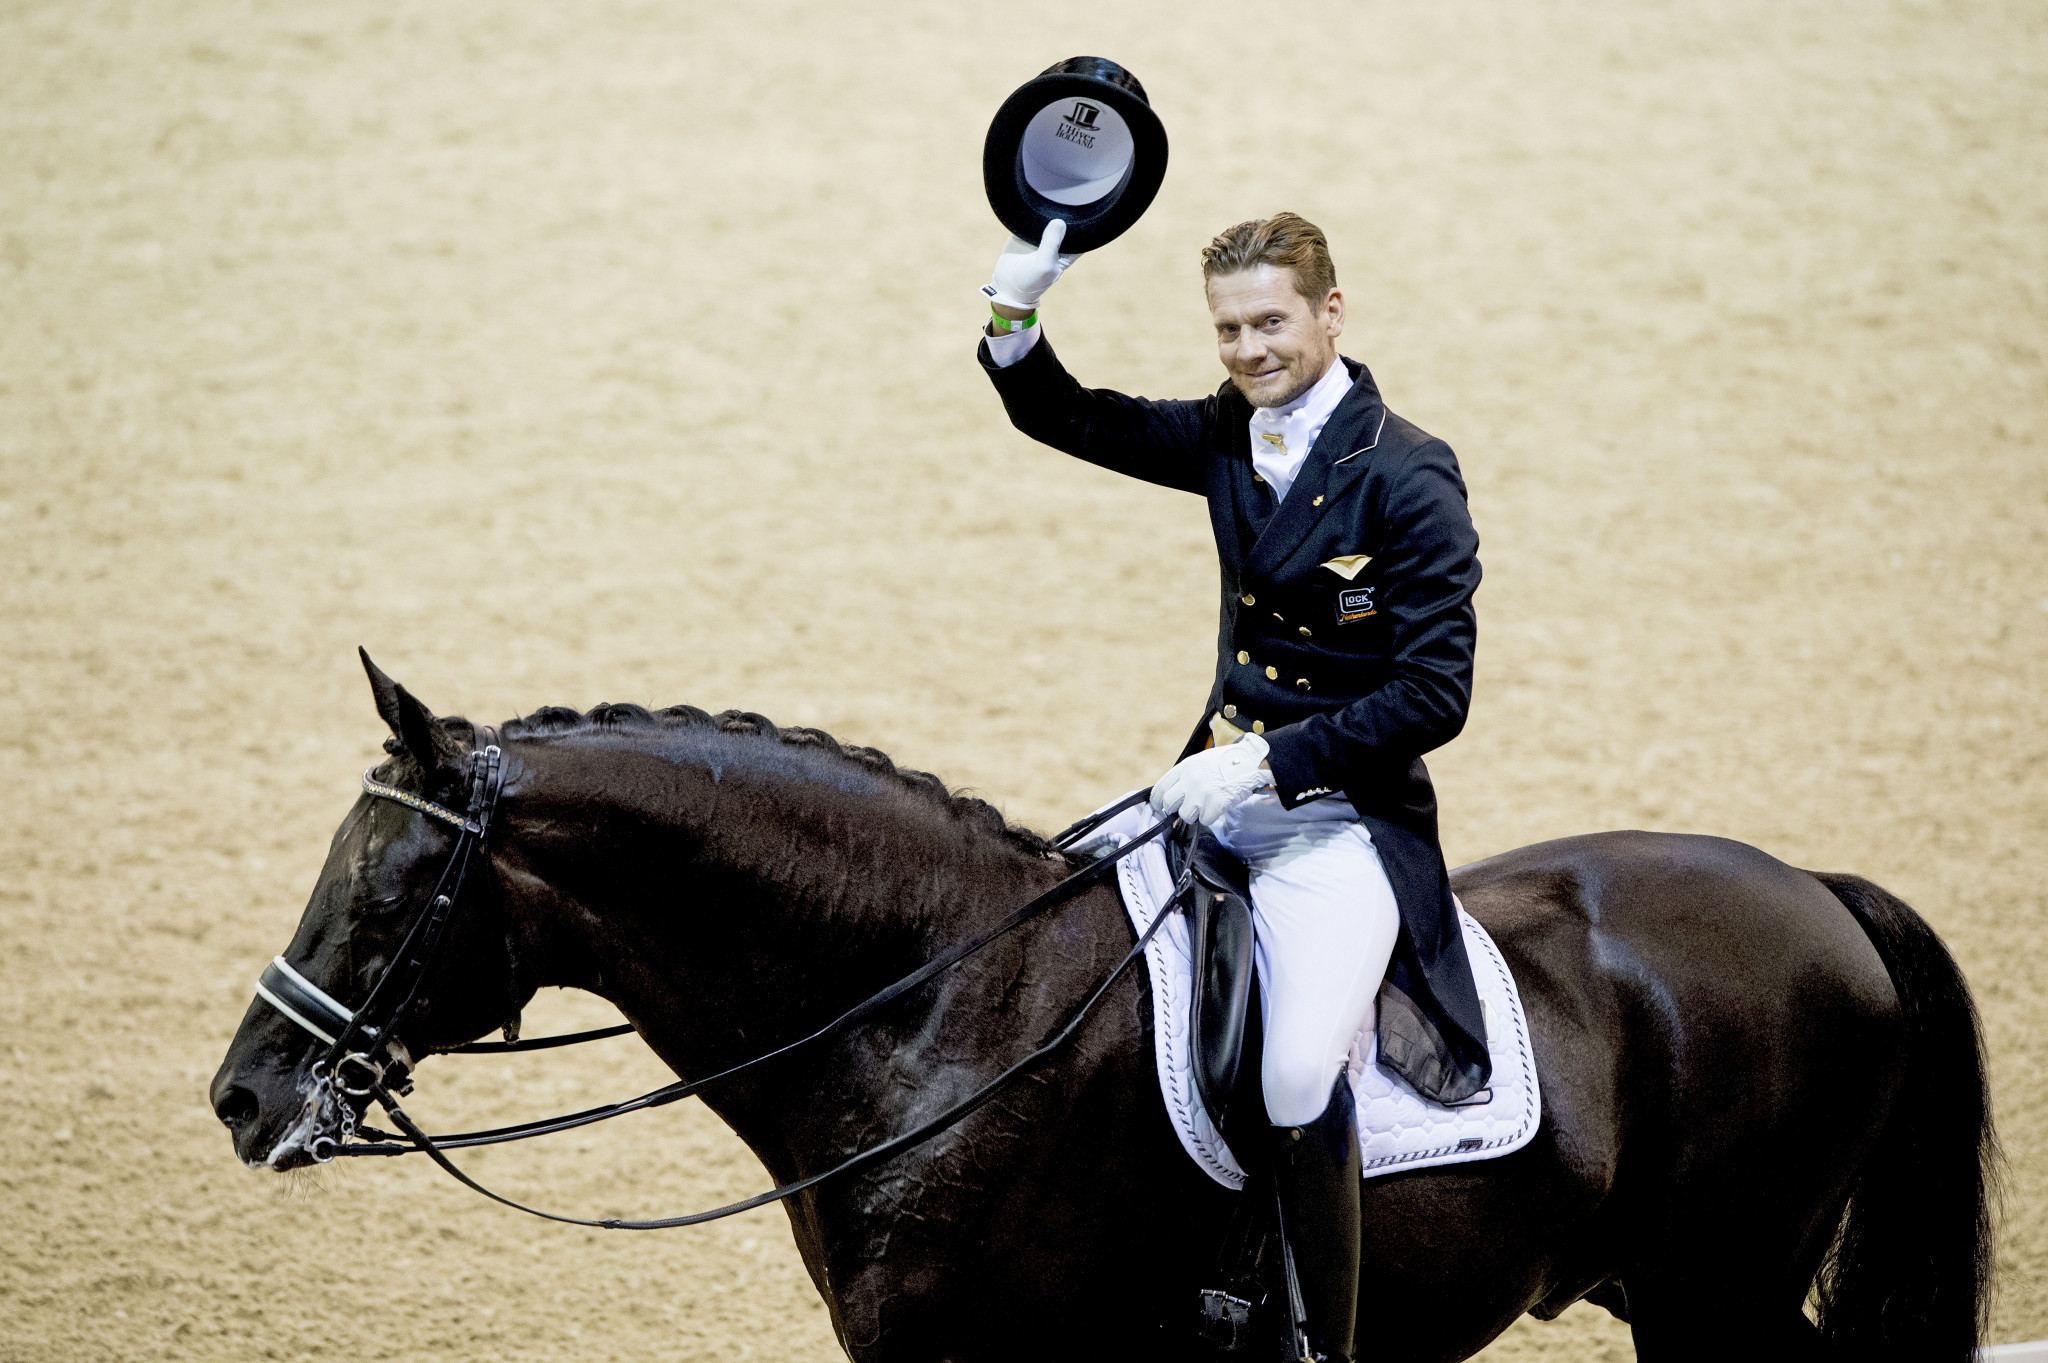 Gal delights home crowd with another FEI Grand Prix win in Rotterdam